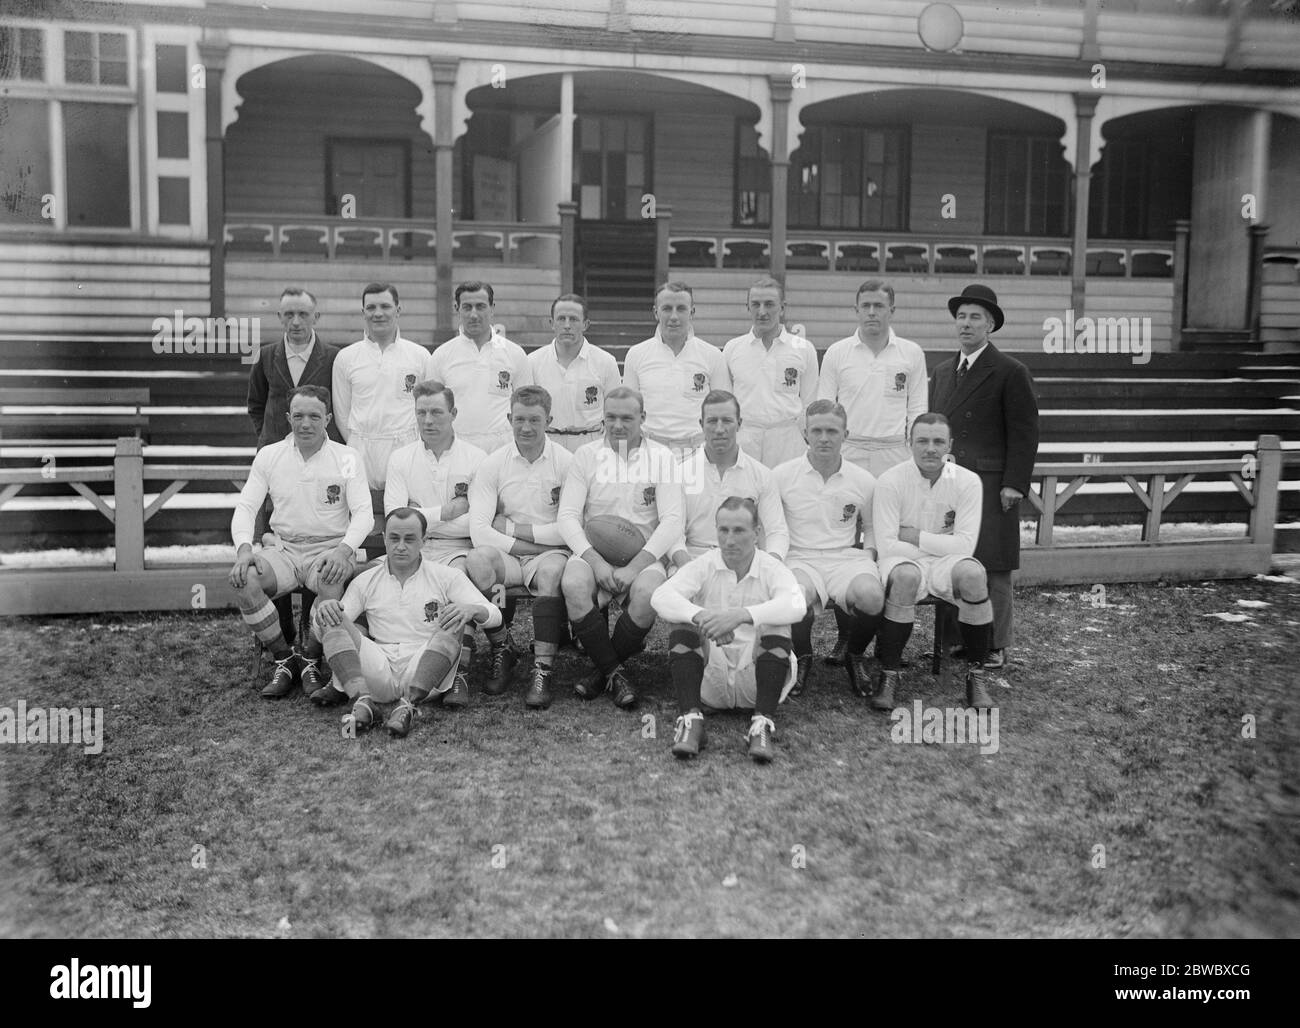 England versus Wales in rugby match at Cardiff . The English team . Back row left to right : W H Acton ( Referee ) , R G Hanvey , E Stanbury , H C Burton , H G Petiton , H C Catcheside , H J Kittermaster and Engr Cmdr S F Coopper , R N ( R U Secretary ) . Middle row : A Robson , J S Tucker , A T Voyce , W W Wakefield , W G E Luddington , R Hamilton Wickes , A R Aslett . On ground : T E S Francis and J R B Worton . 16 January 1926 Stock Photo